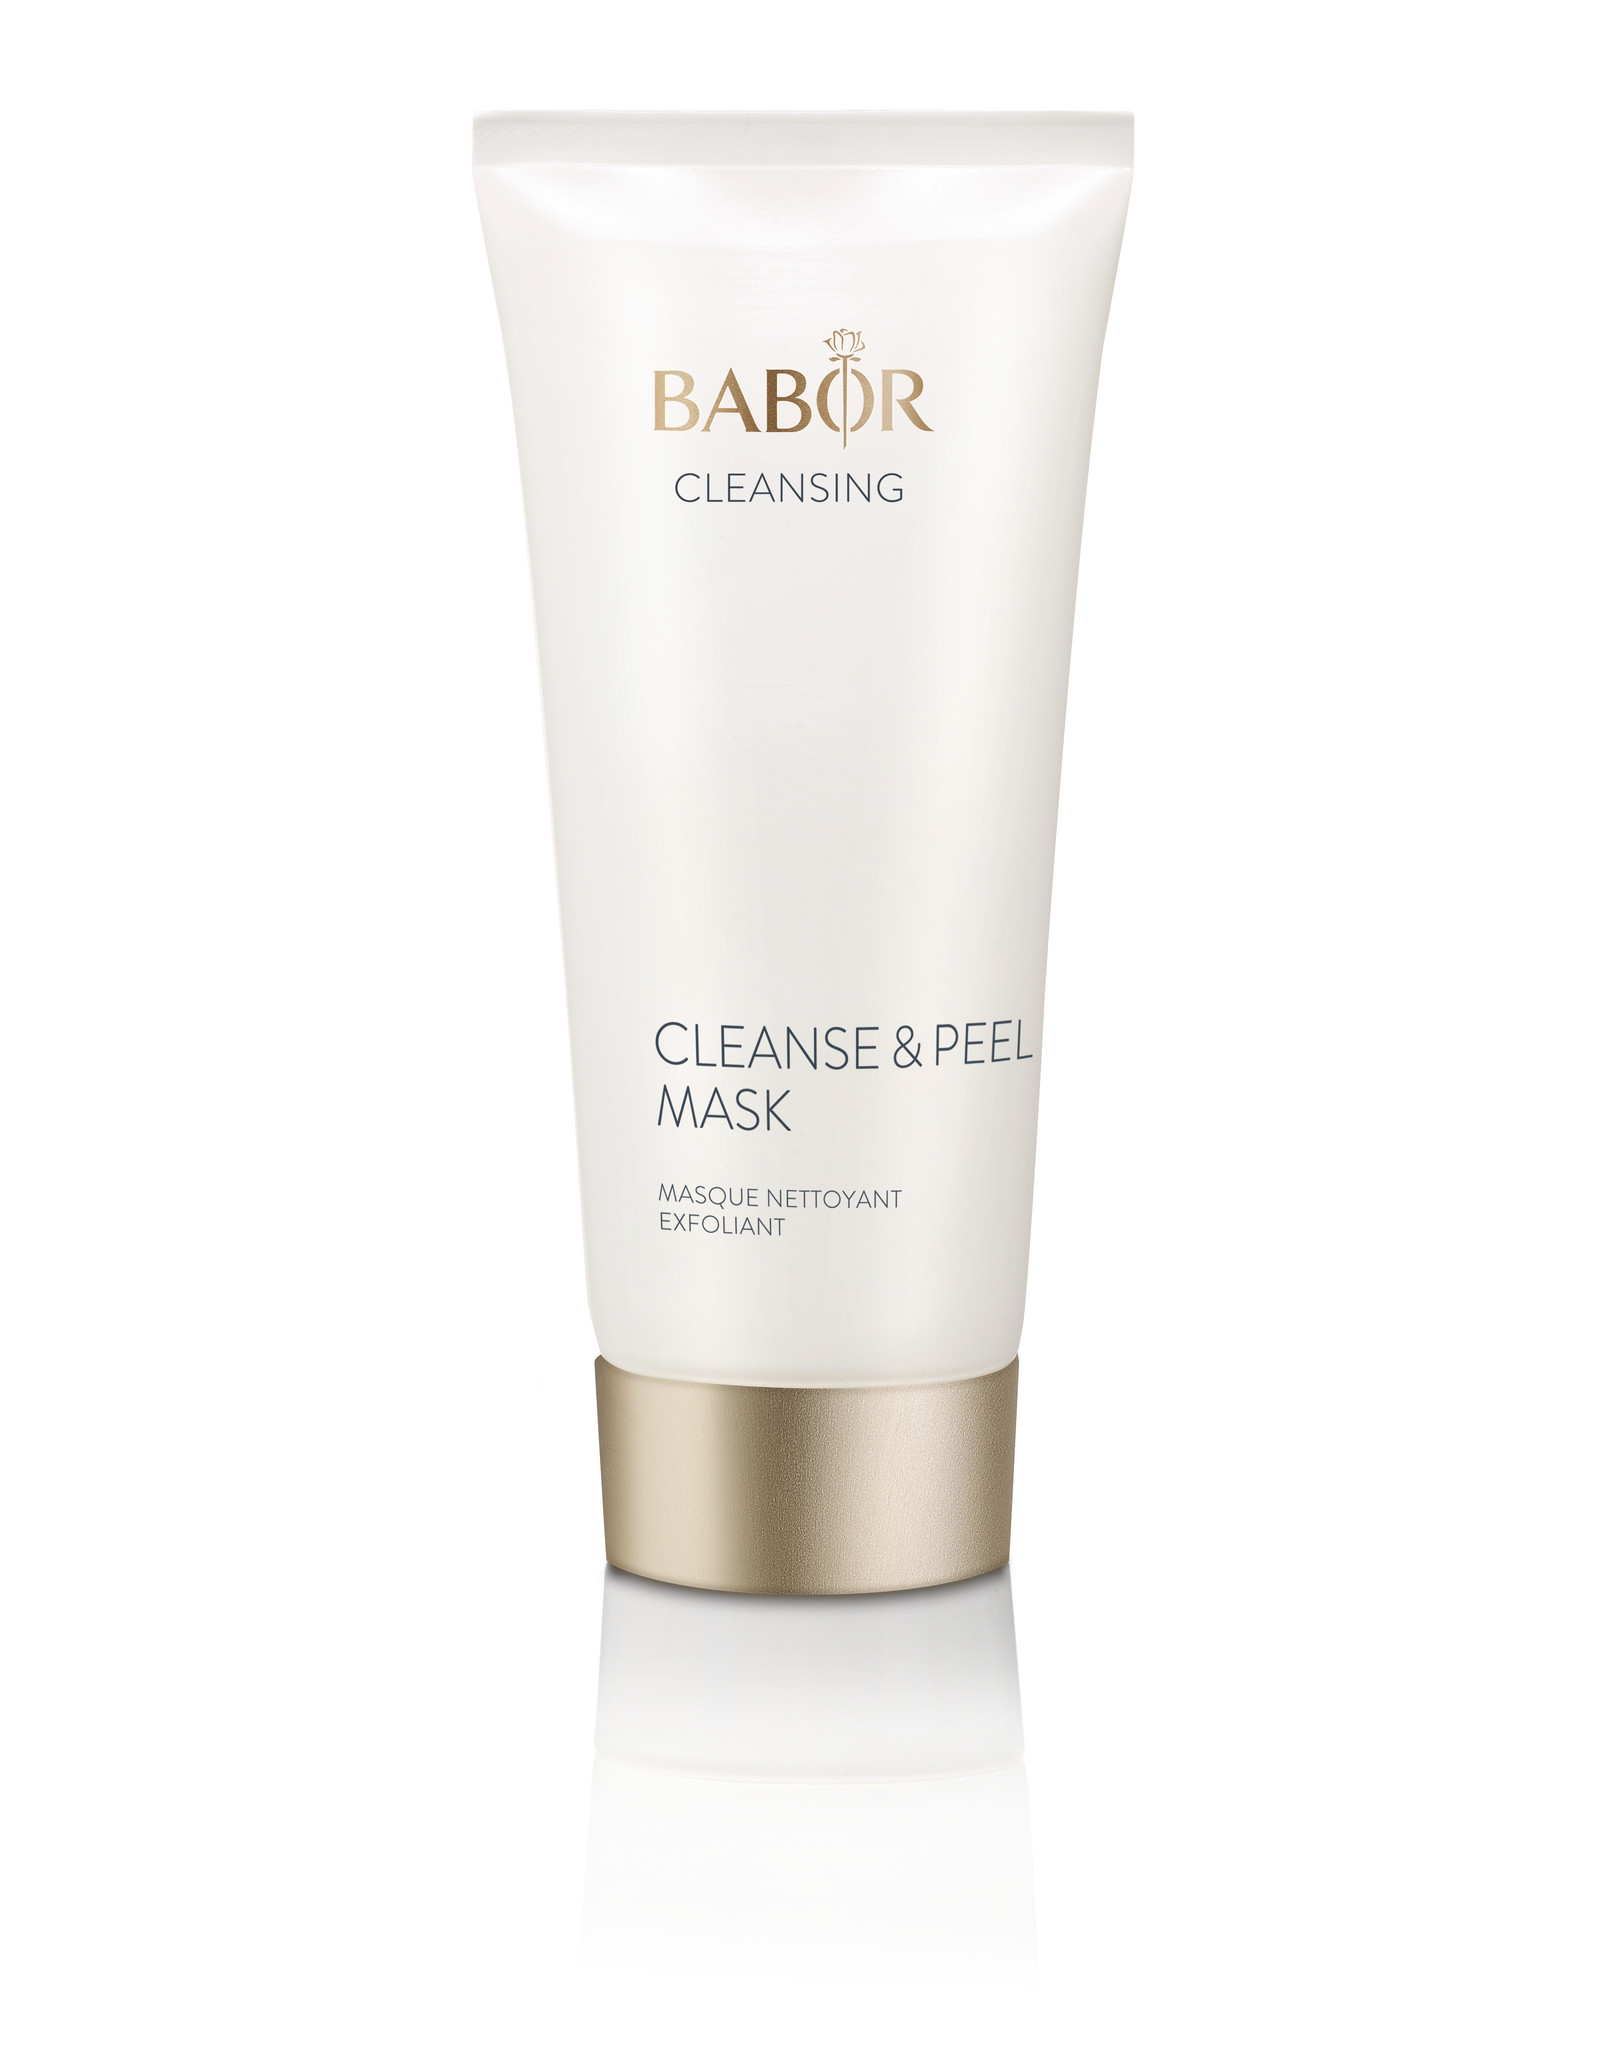 BABOR CLEANSING CLEANSE & PEEL MASK 50 ML